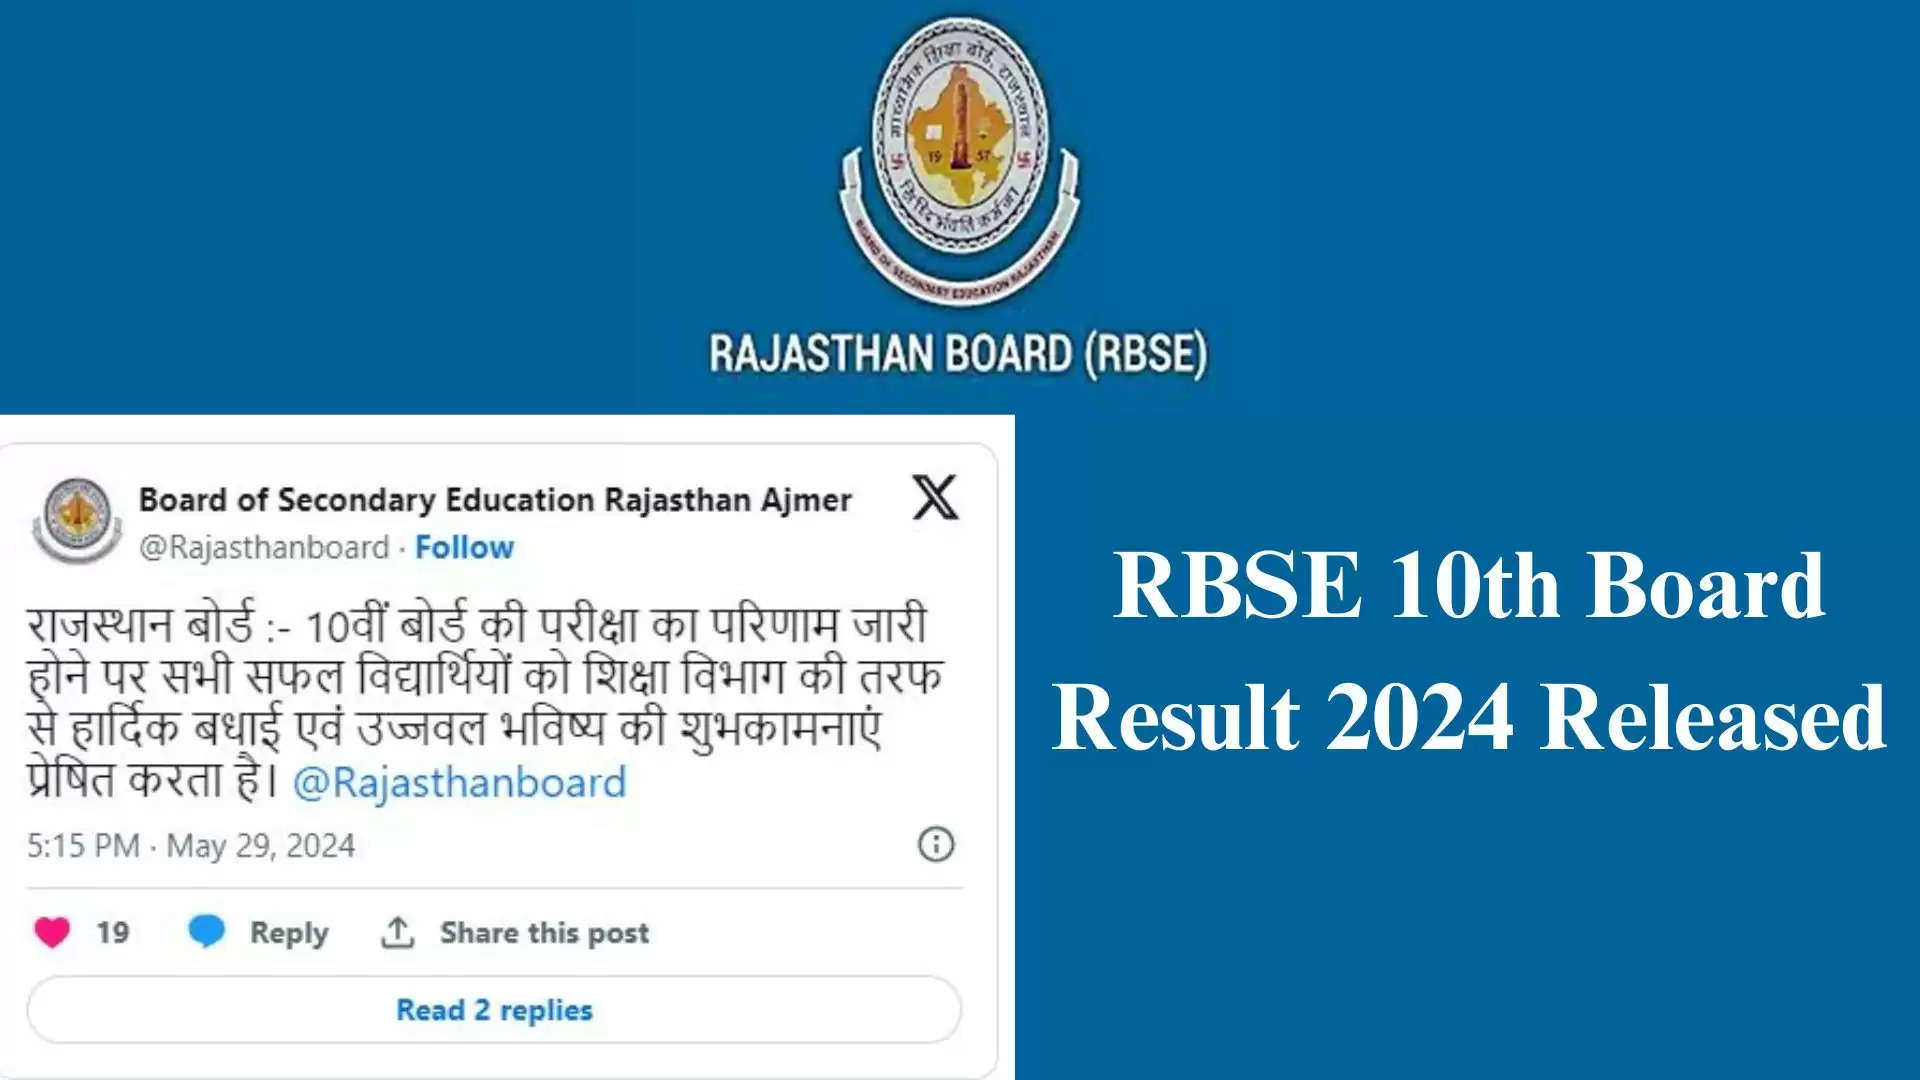 RBSE 10th Board Results 2024